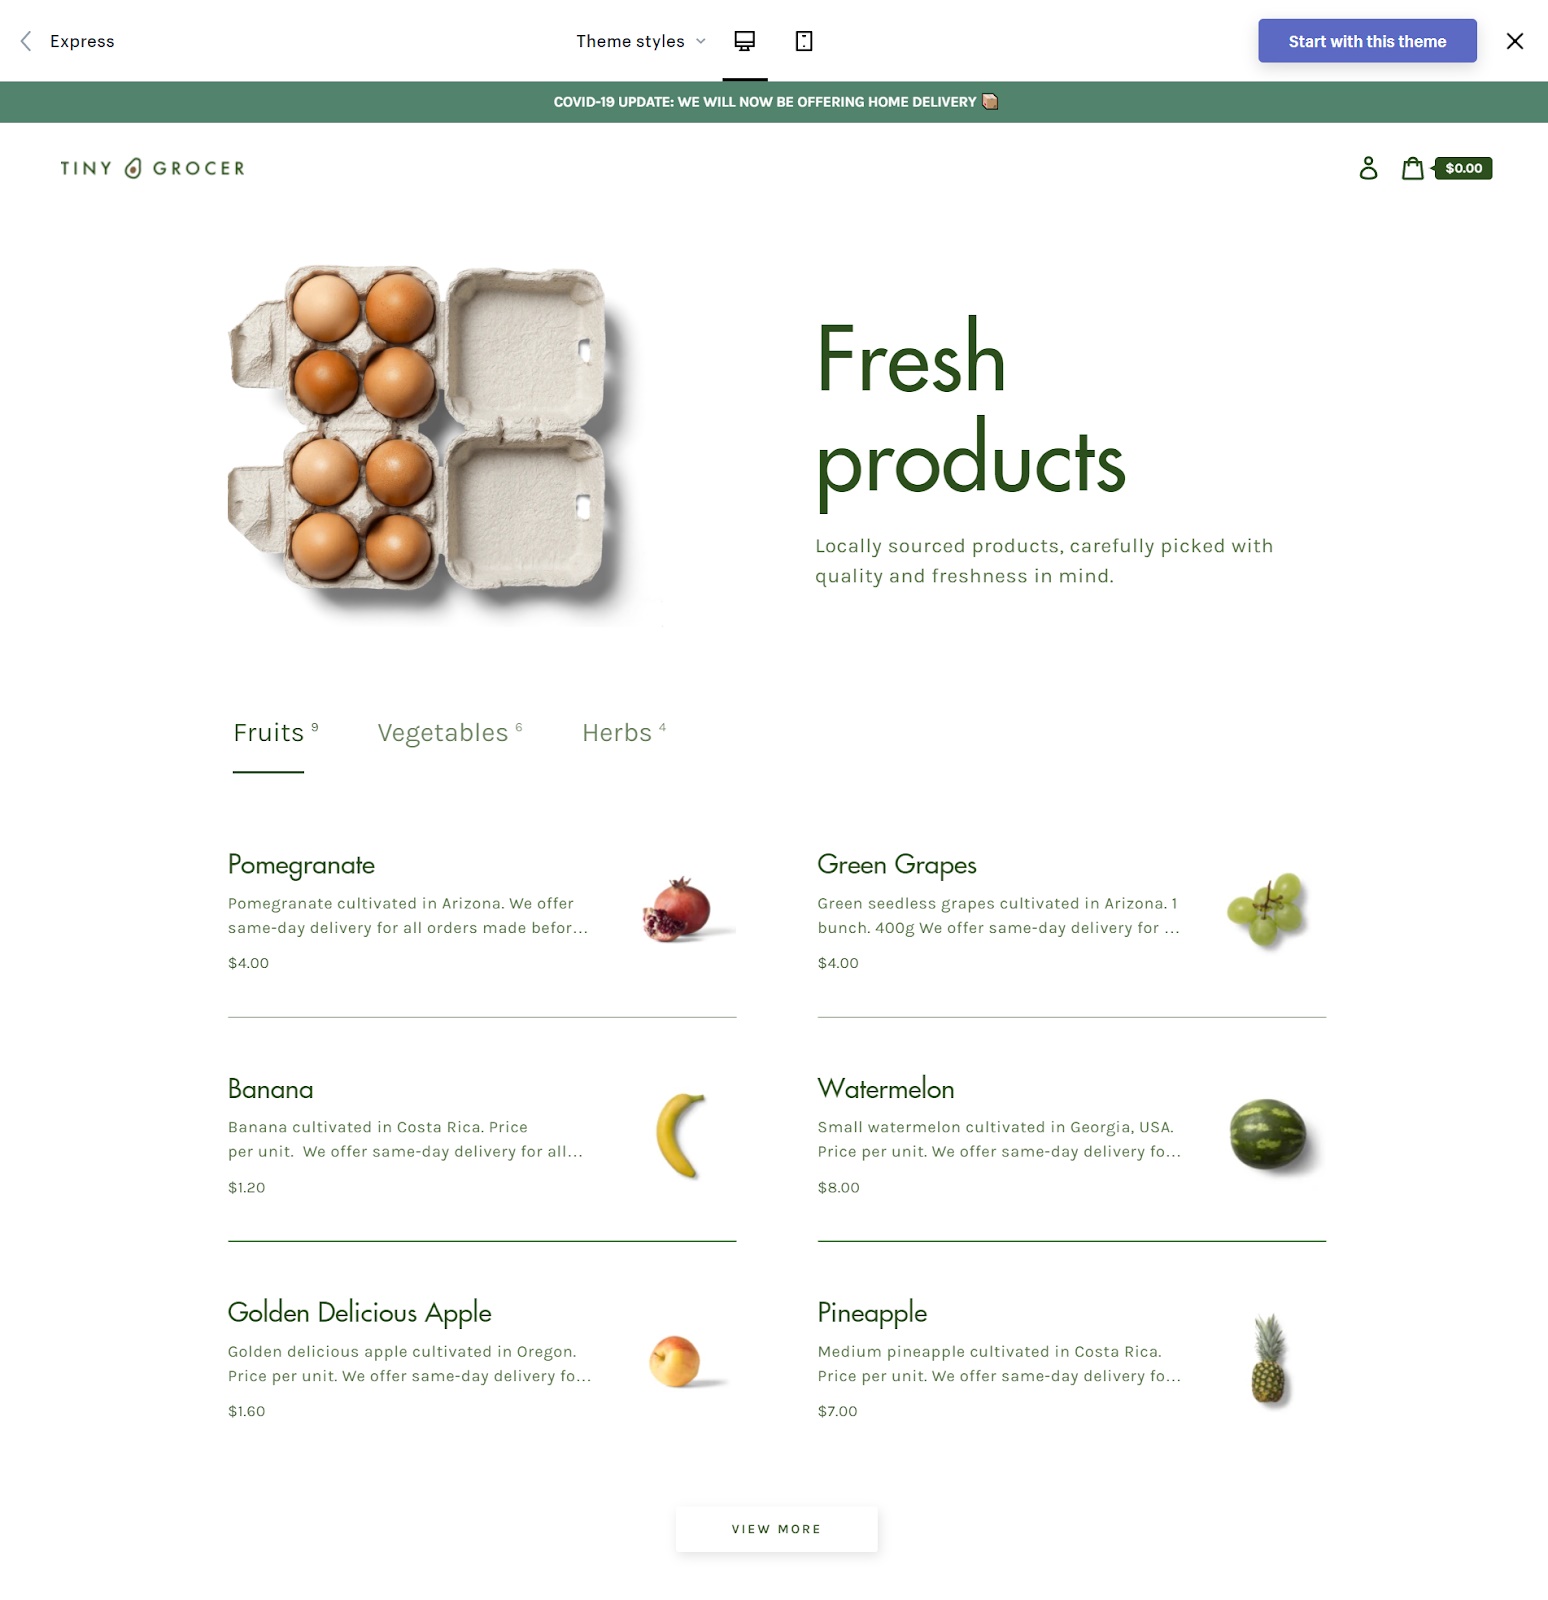 Pantry style of Shopify Express Theme